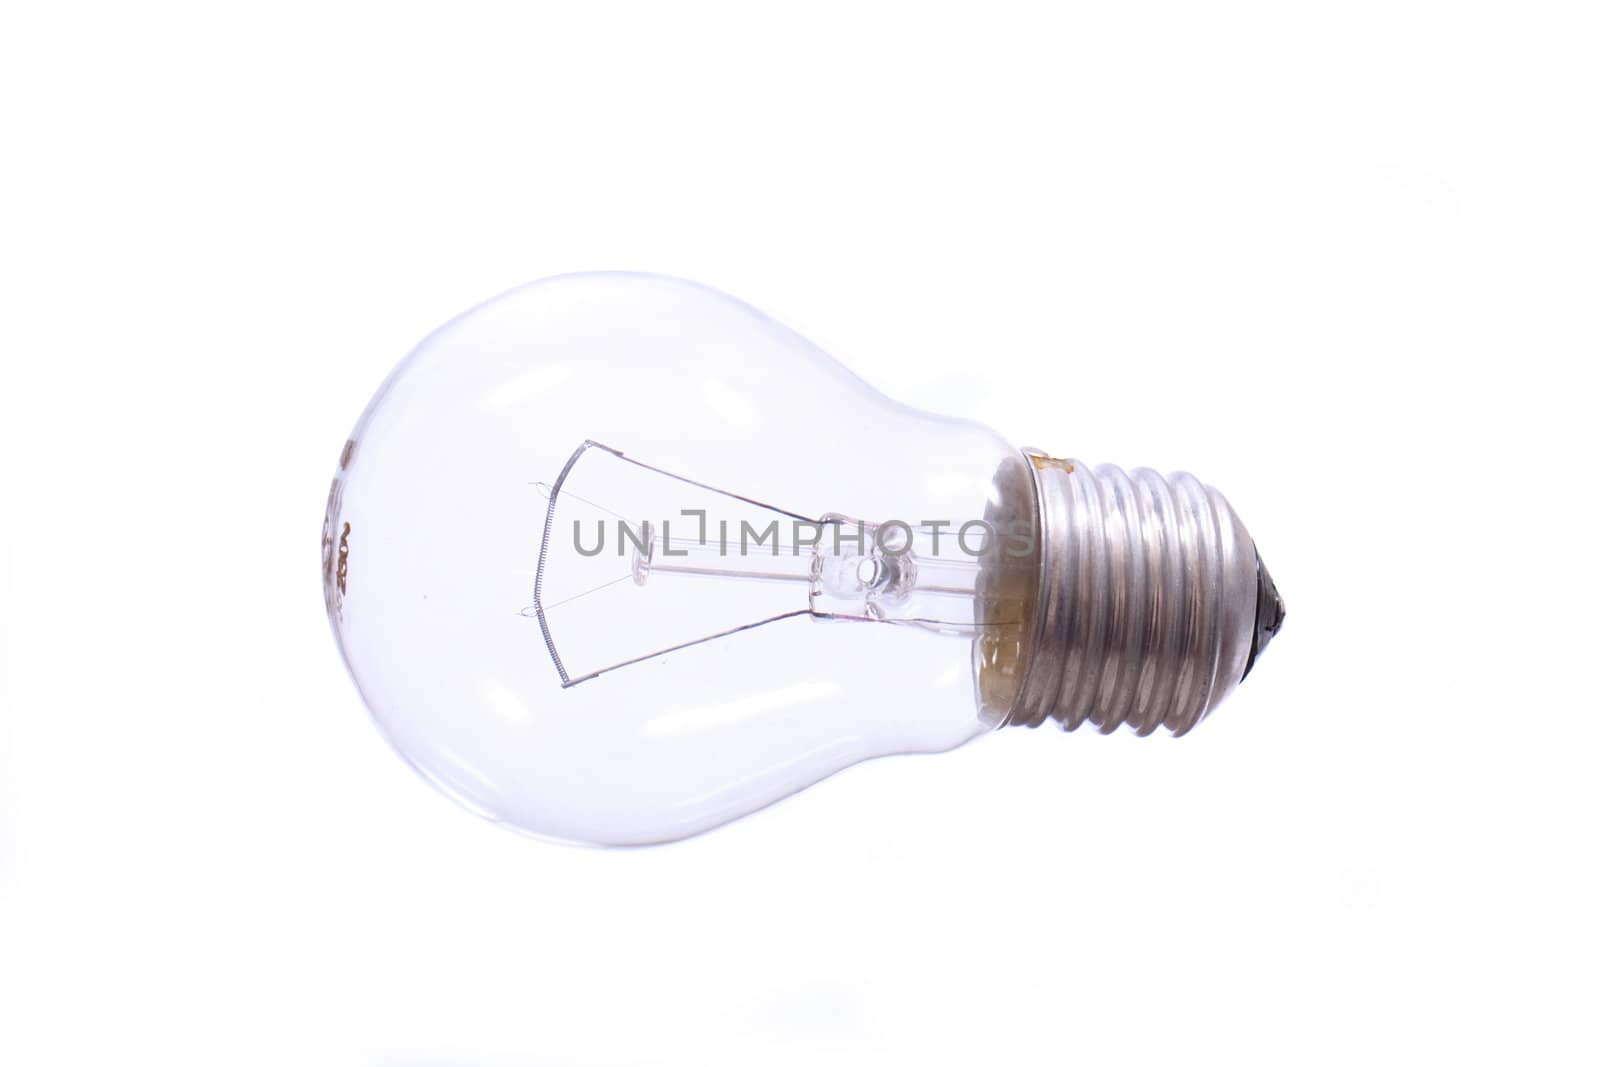 new glass bulb on the white background 